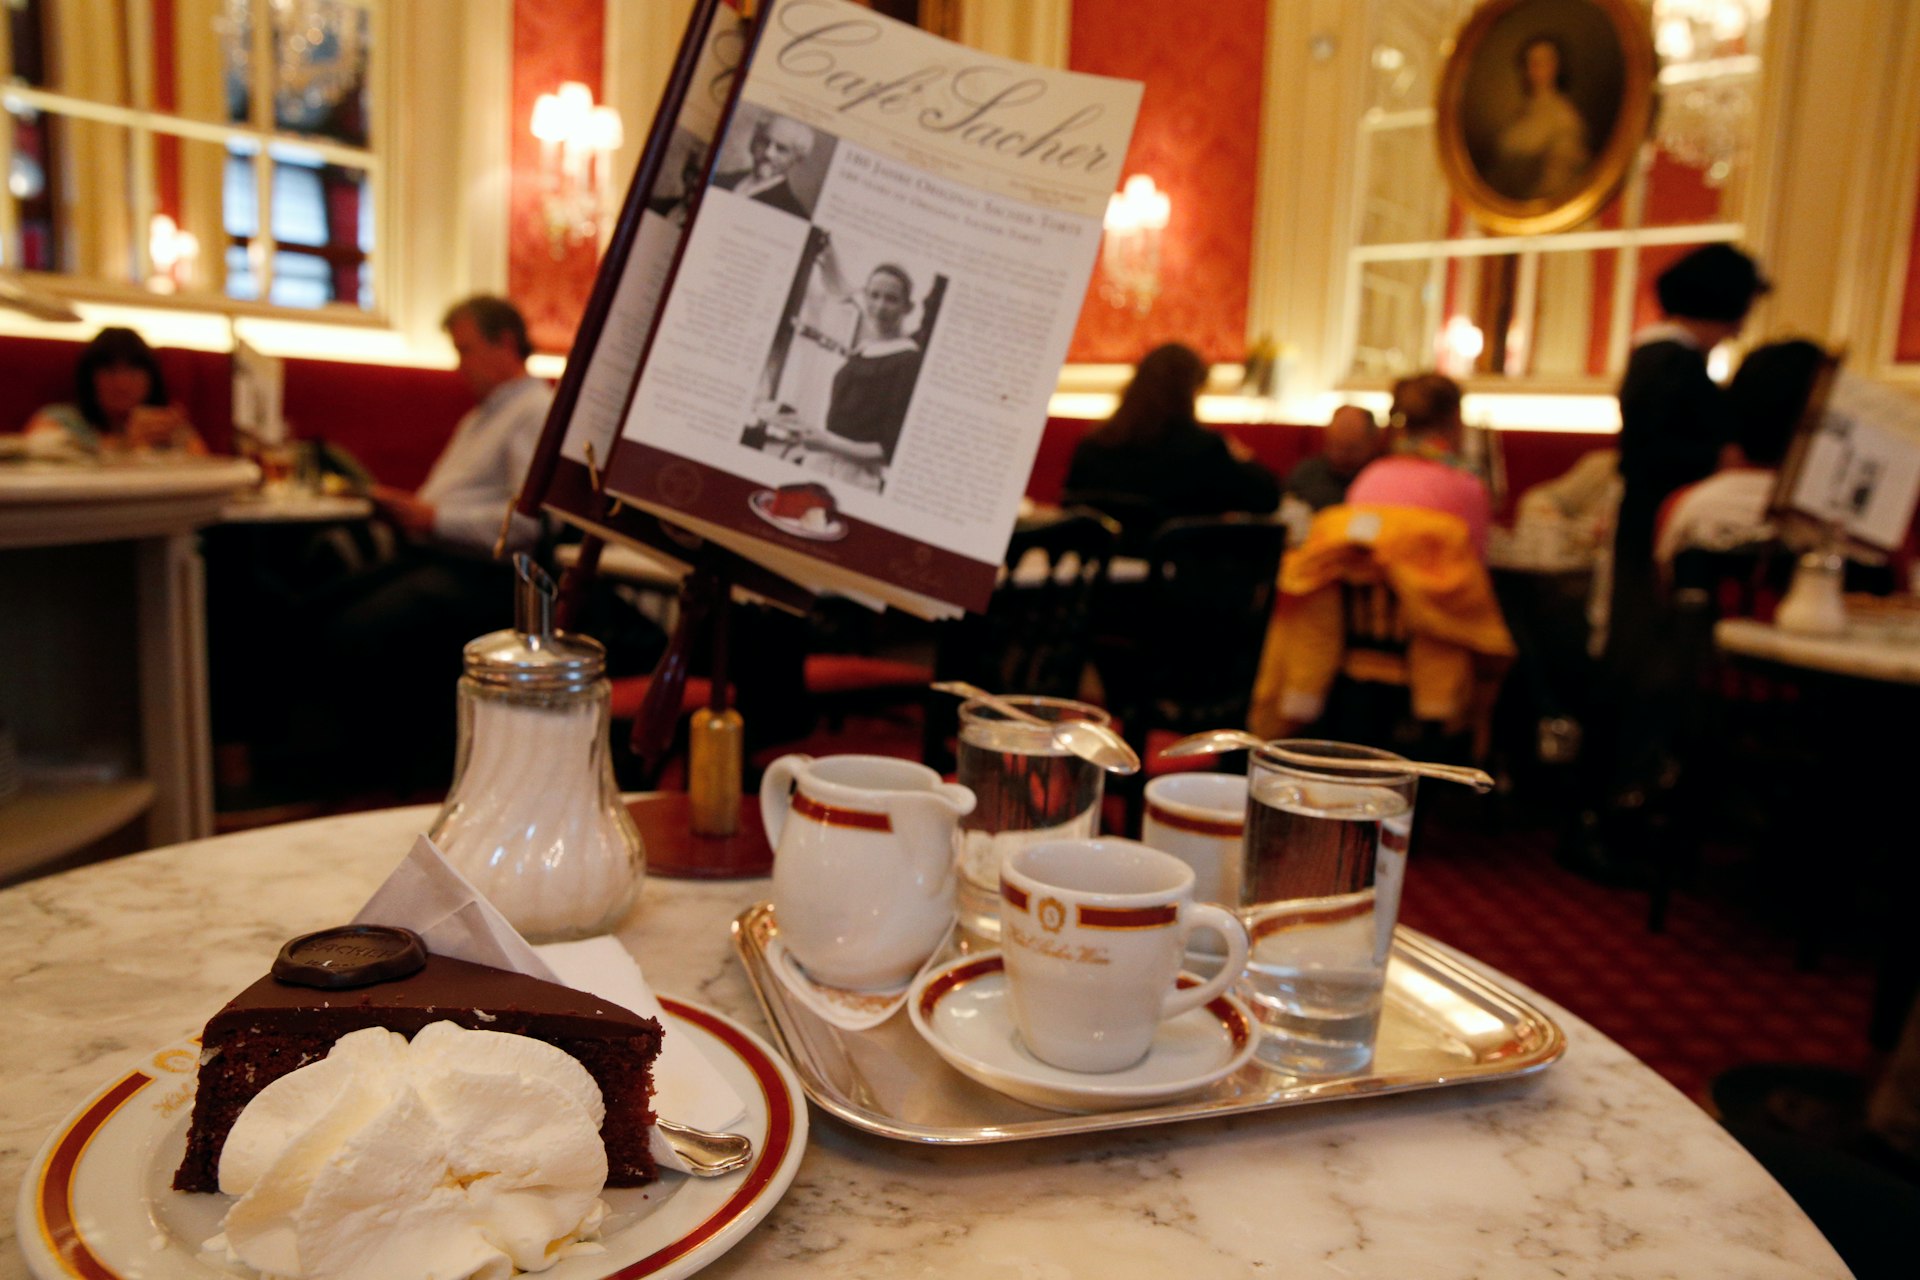 The interior of Café Sacher in Vienna; in the foreground is a table which has a tray holding coffee cups and a milk jug, and next to it is a plate with a slice of Sachertorte